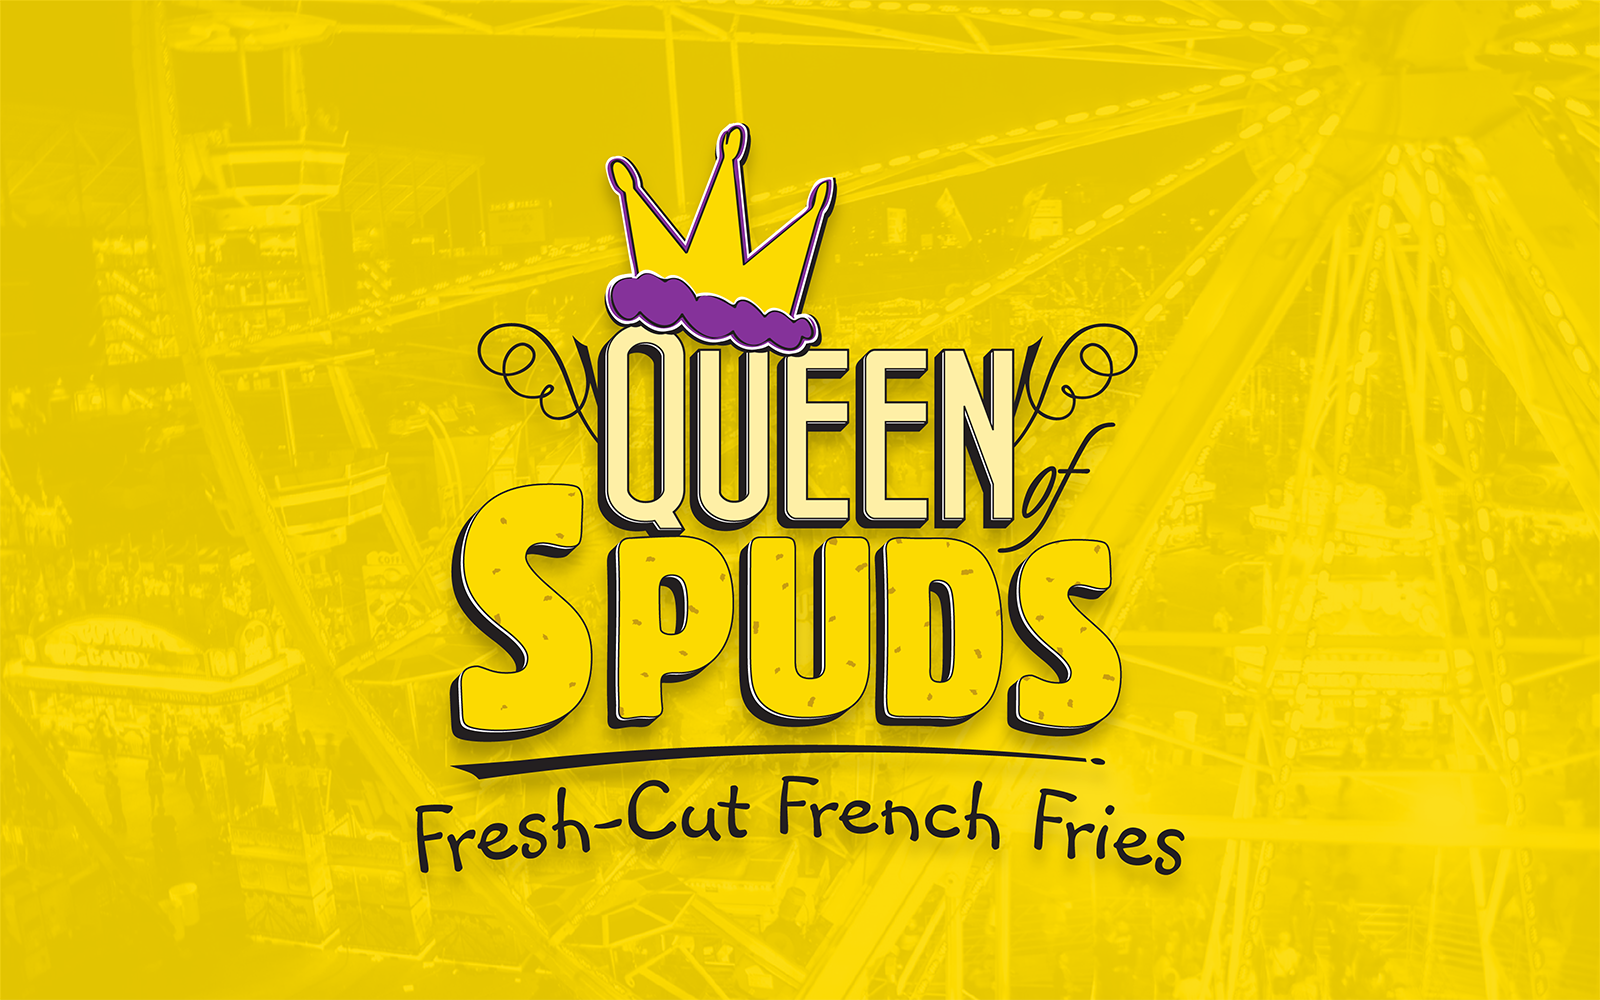 Ferris wheel with a yellow overlay and Queen of Spuds Fresh Cut French Fries logo overlaid